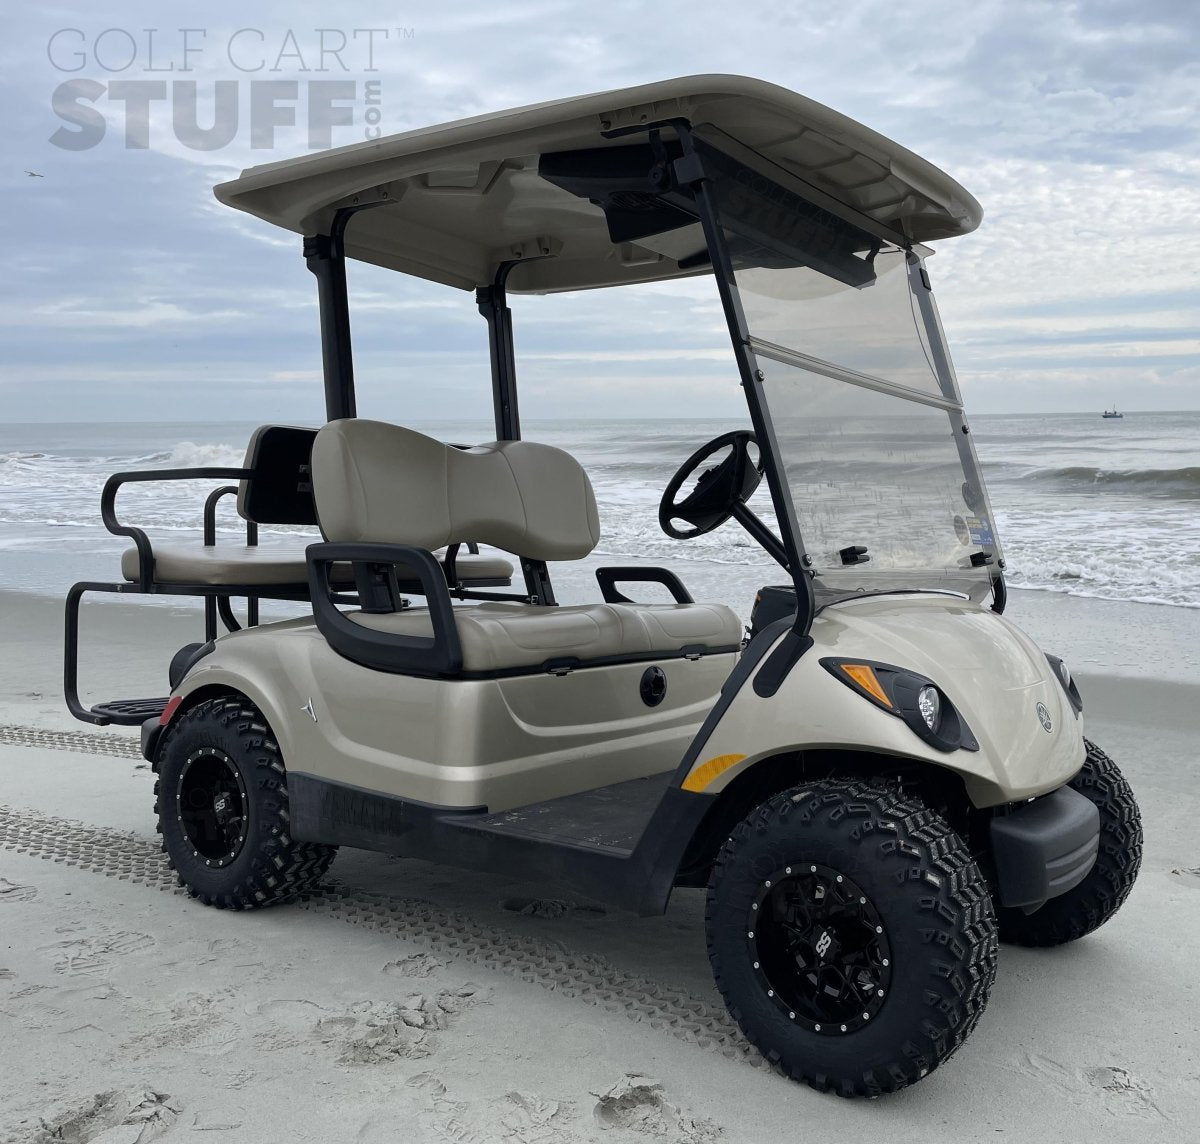 Yamaha Golf Cart Wheels: The 3 Things You Need To Know - GOLFCARTSTUFF.COM™